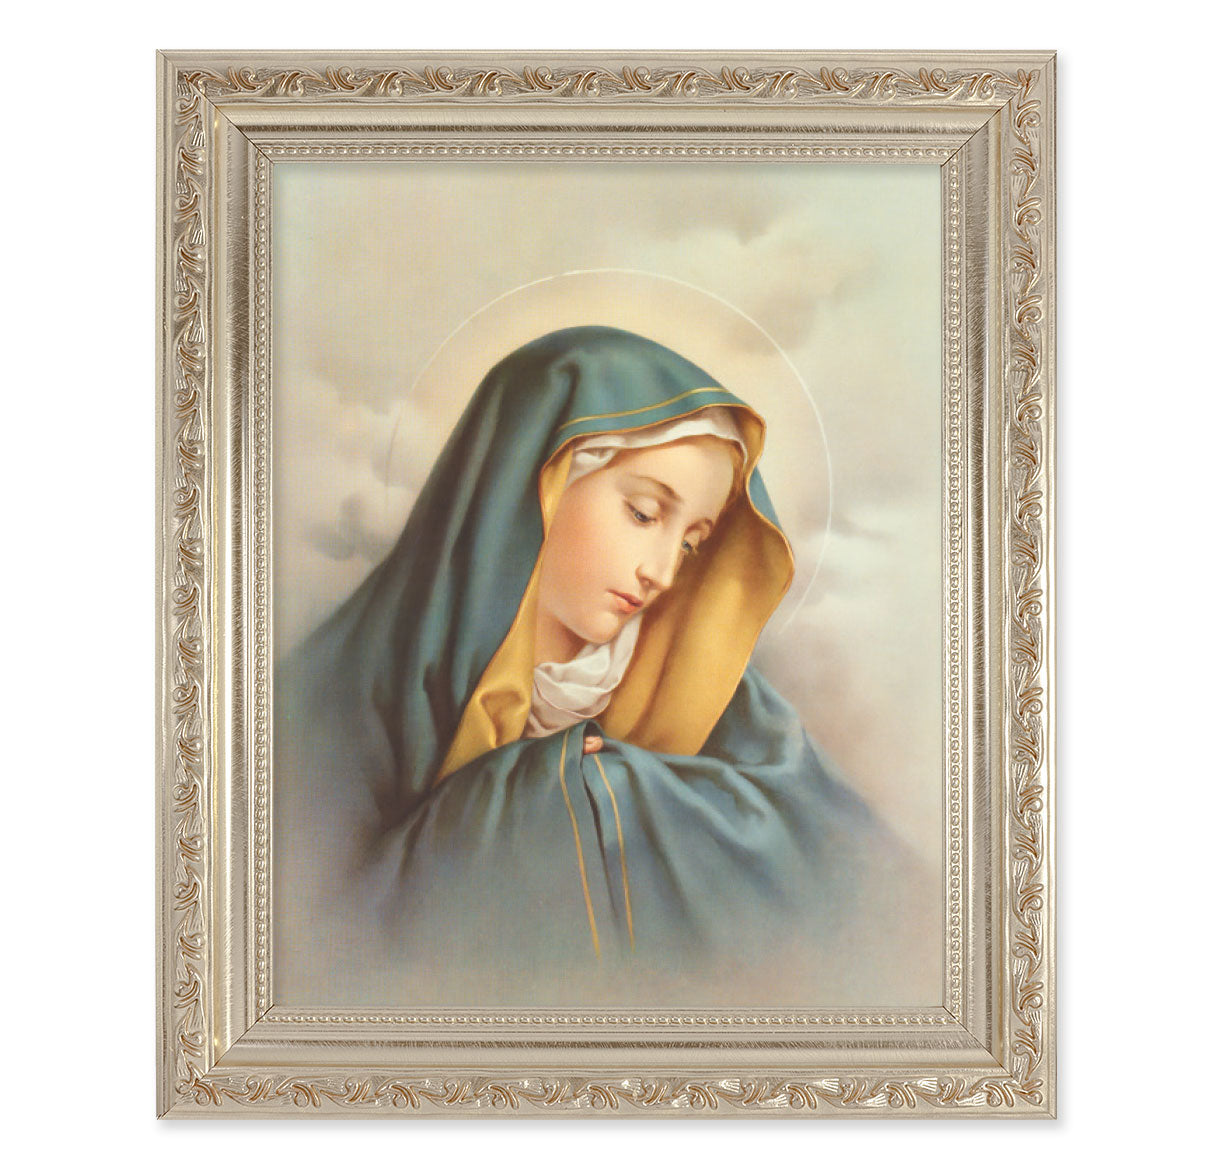 Our Lady of Sorrows Antique Silver Framed Art